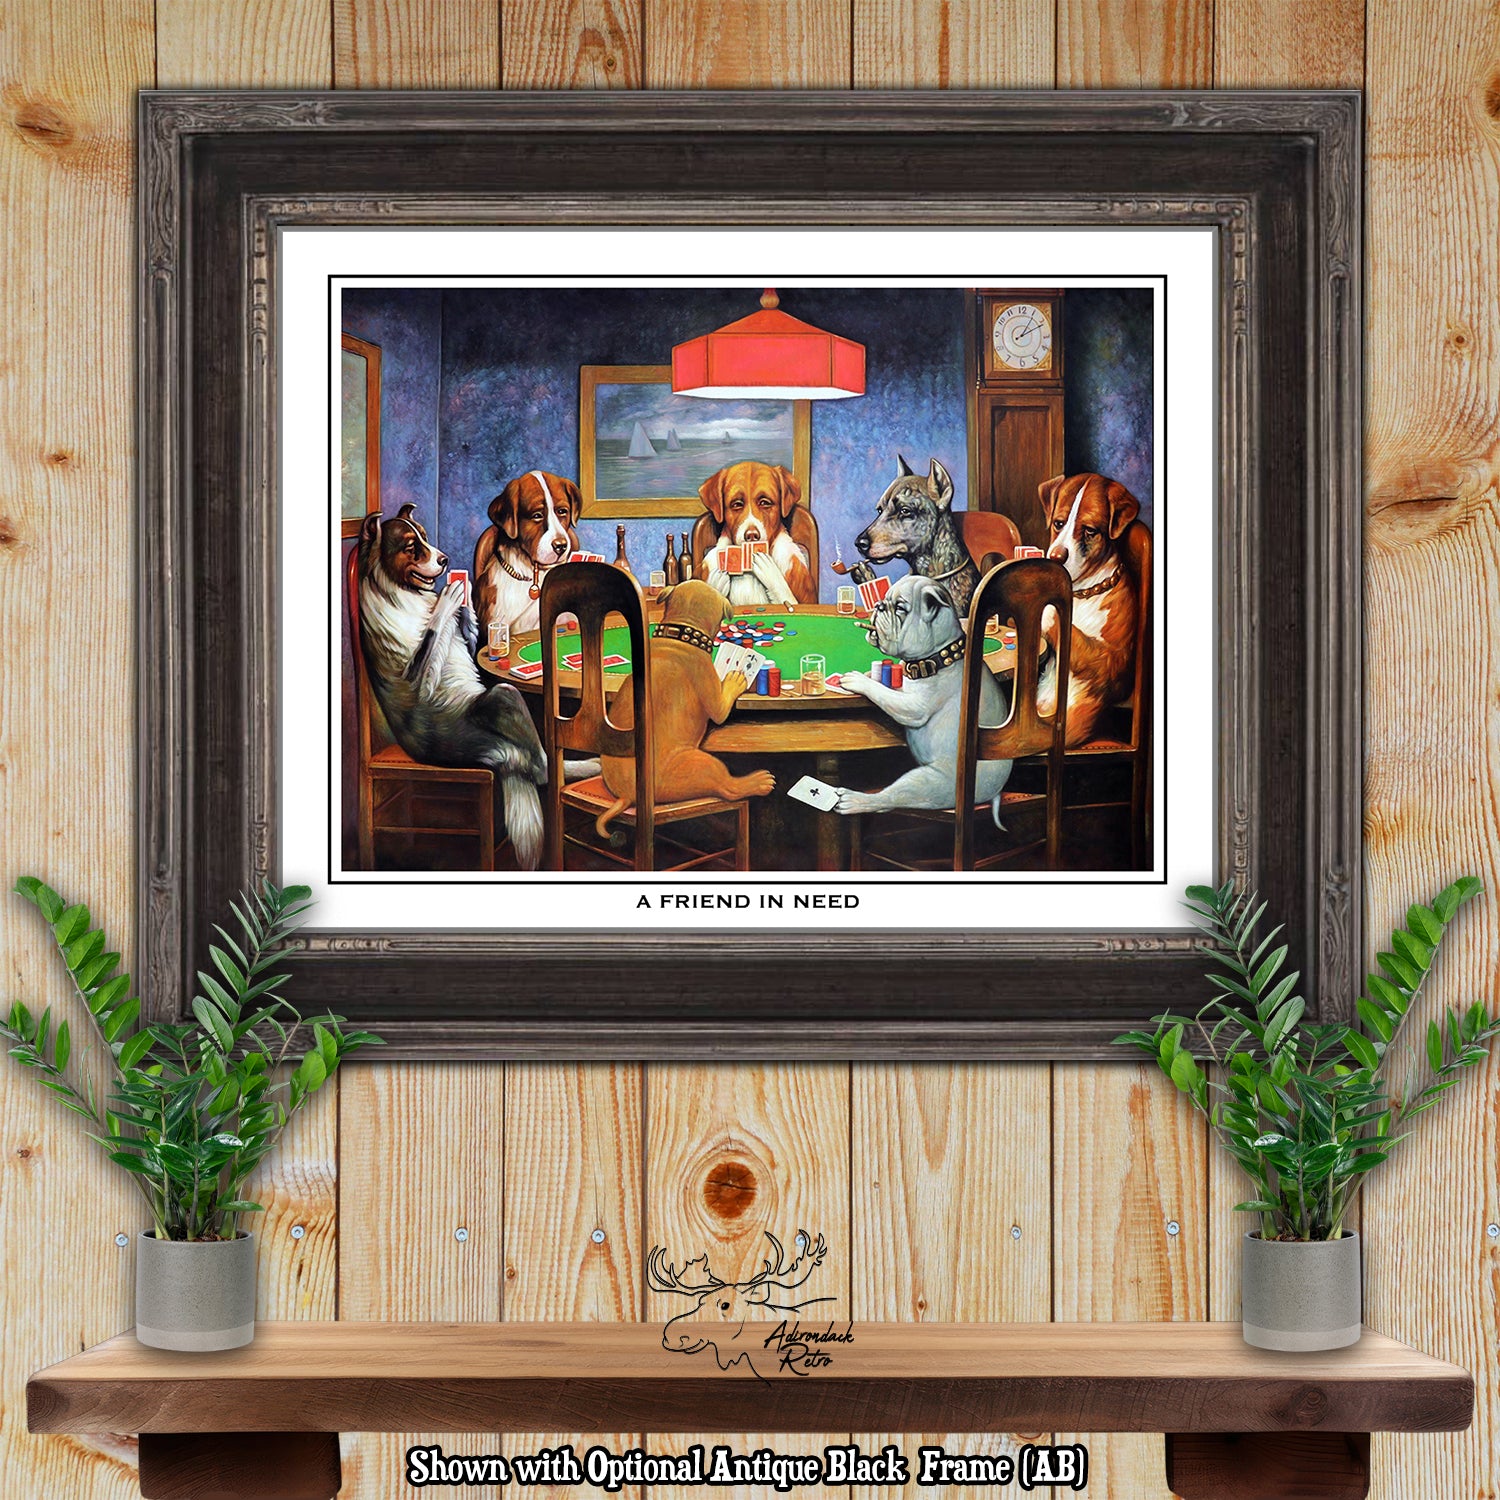 A Friend In Need by C.M. Coolidge Giclee Fine Art Poker Print - Dogs Playing Poker Print at Adirondack Retro